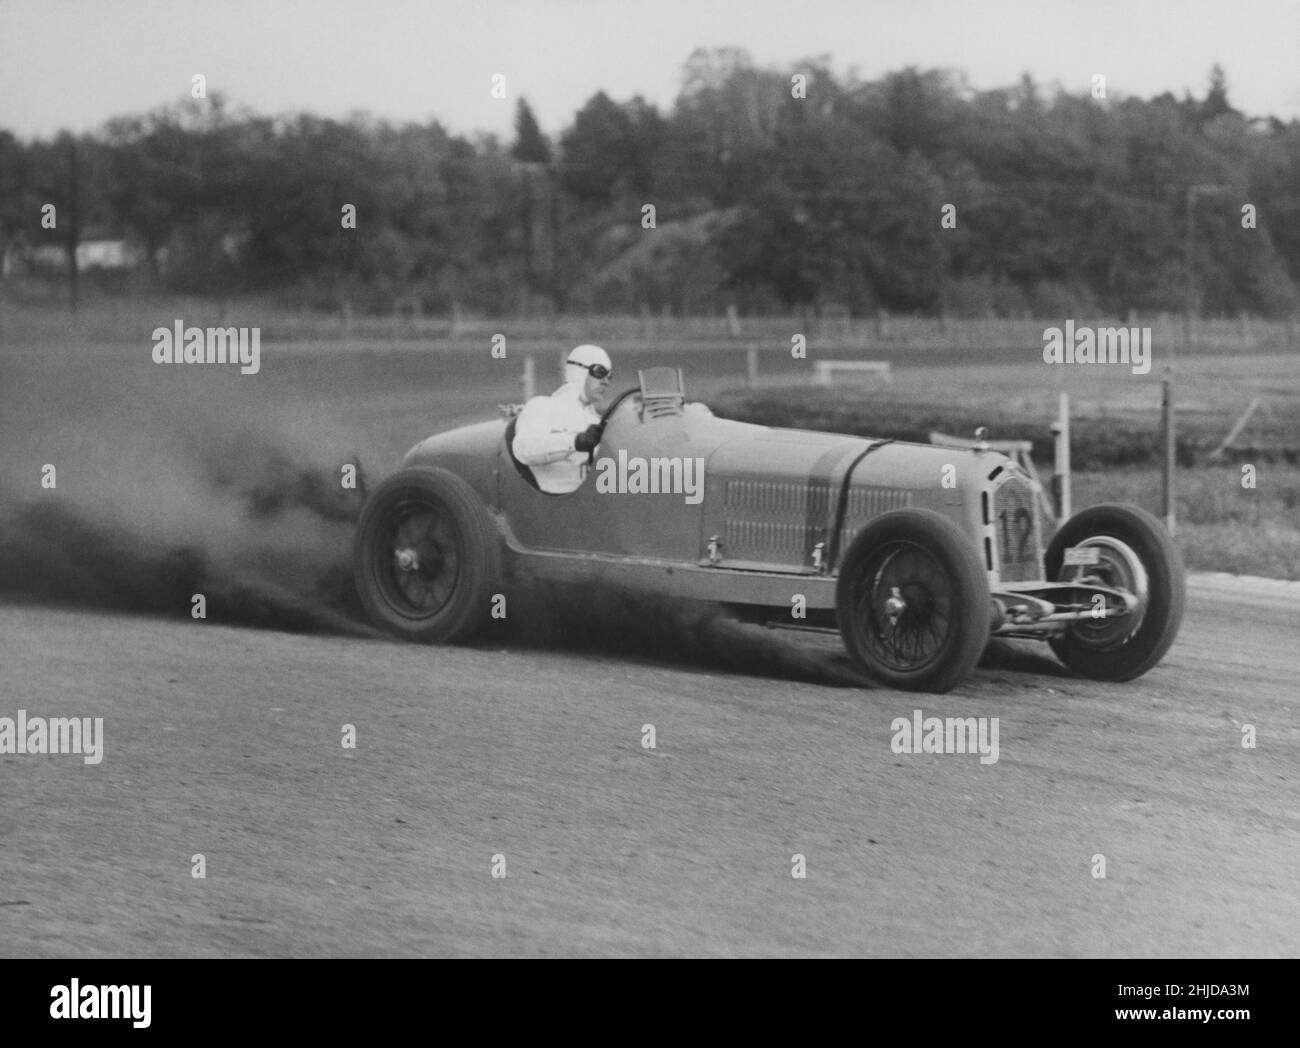 Racing car of the 1930s. The swedish racingdriver in his Alfa Romeo Monza is seen taking the curve in full speed during the international racing event at Solvalla in Stockholm on october 15 1935. Stock Photo